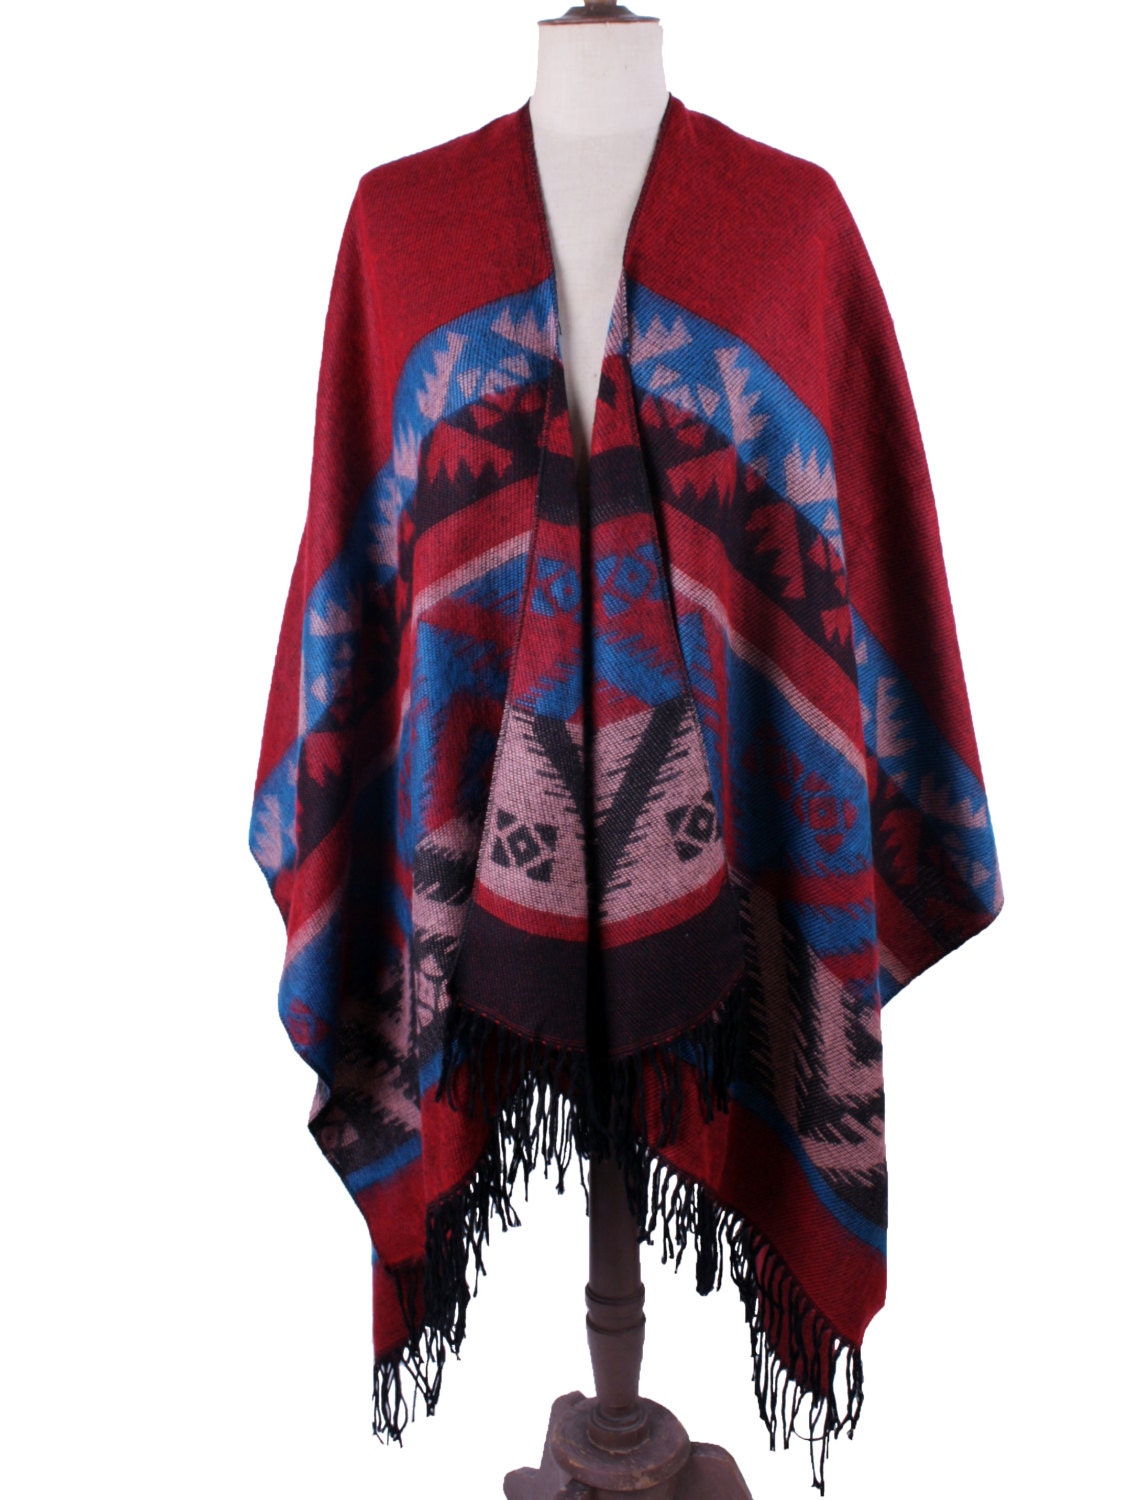 Women's Poncho OverSize Poncho Gift For Her For Winter